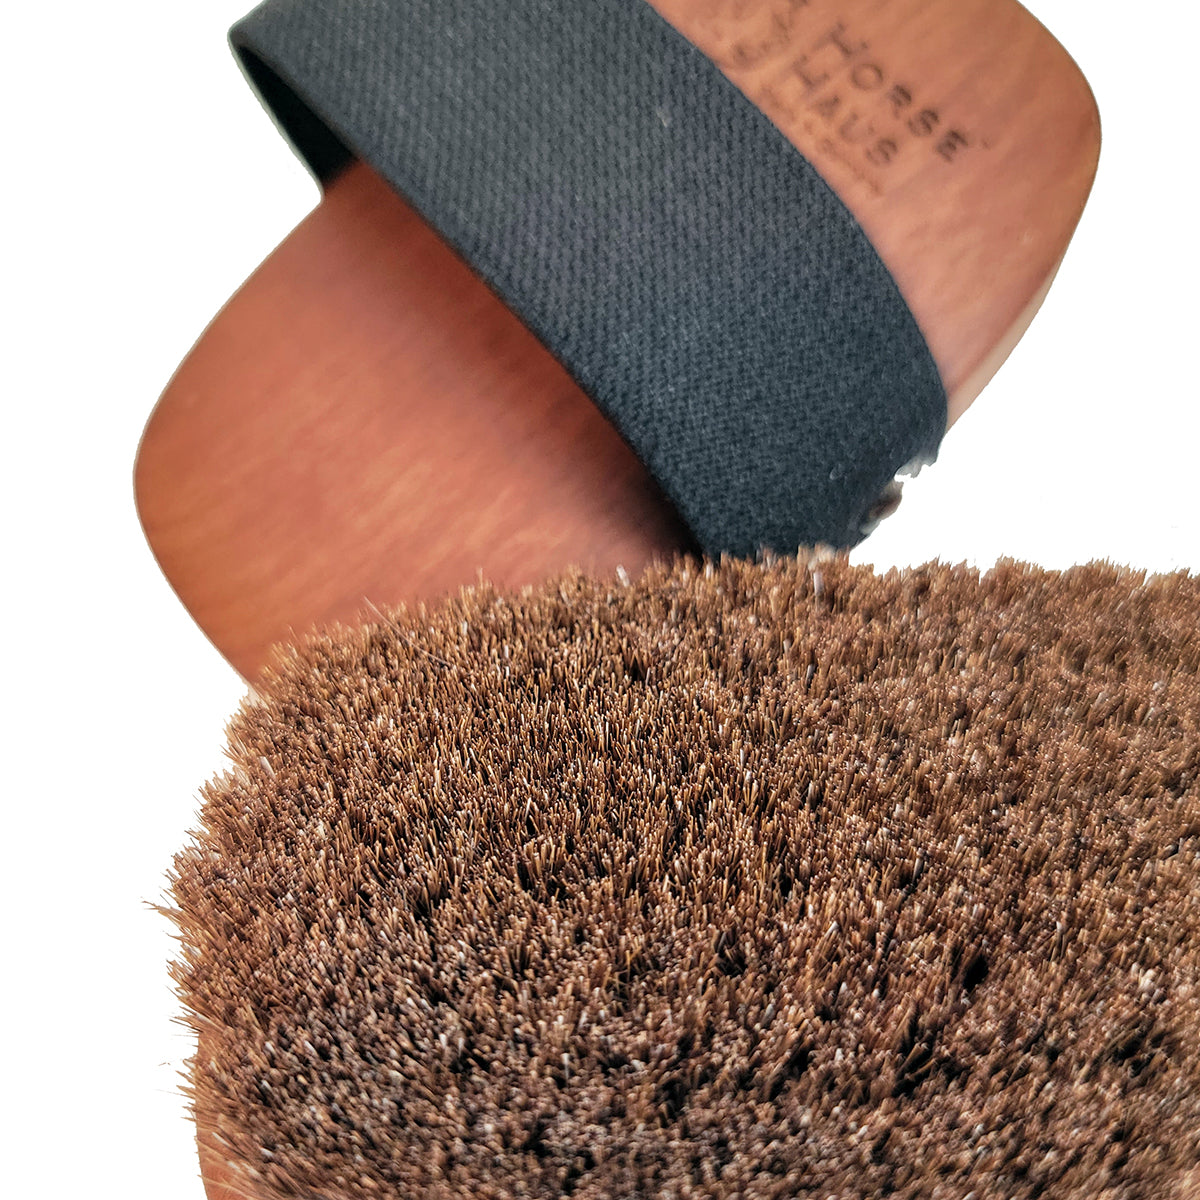 soft brown bristles on a small horse head brush